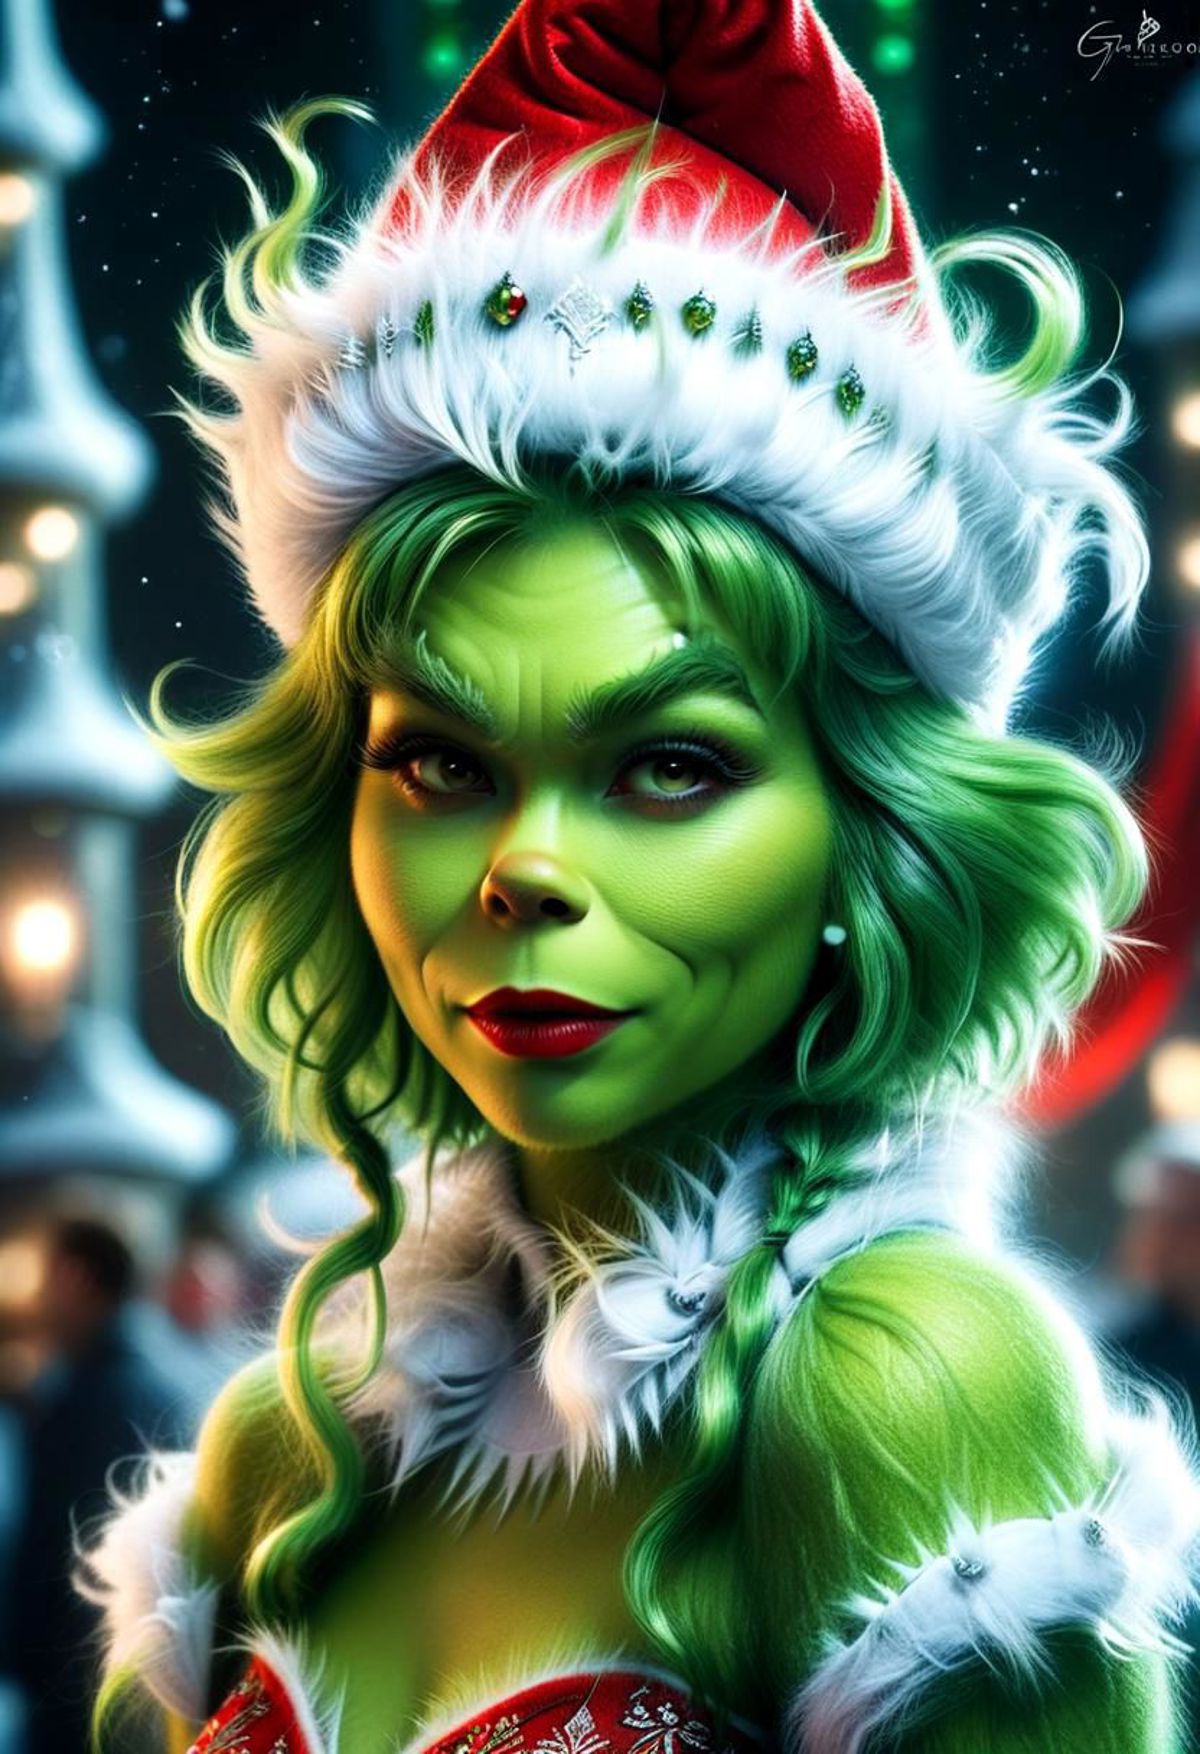 The Grinch - SDXL image by kyttyn888960